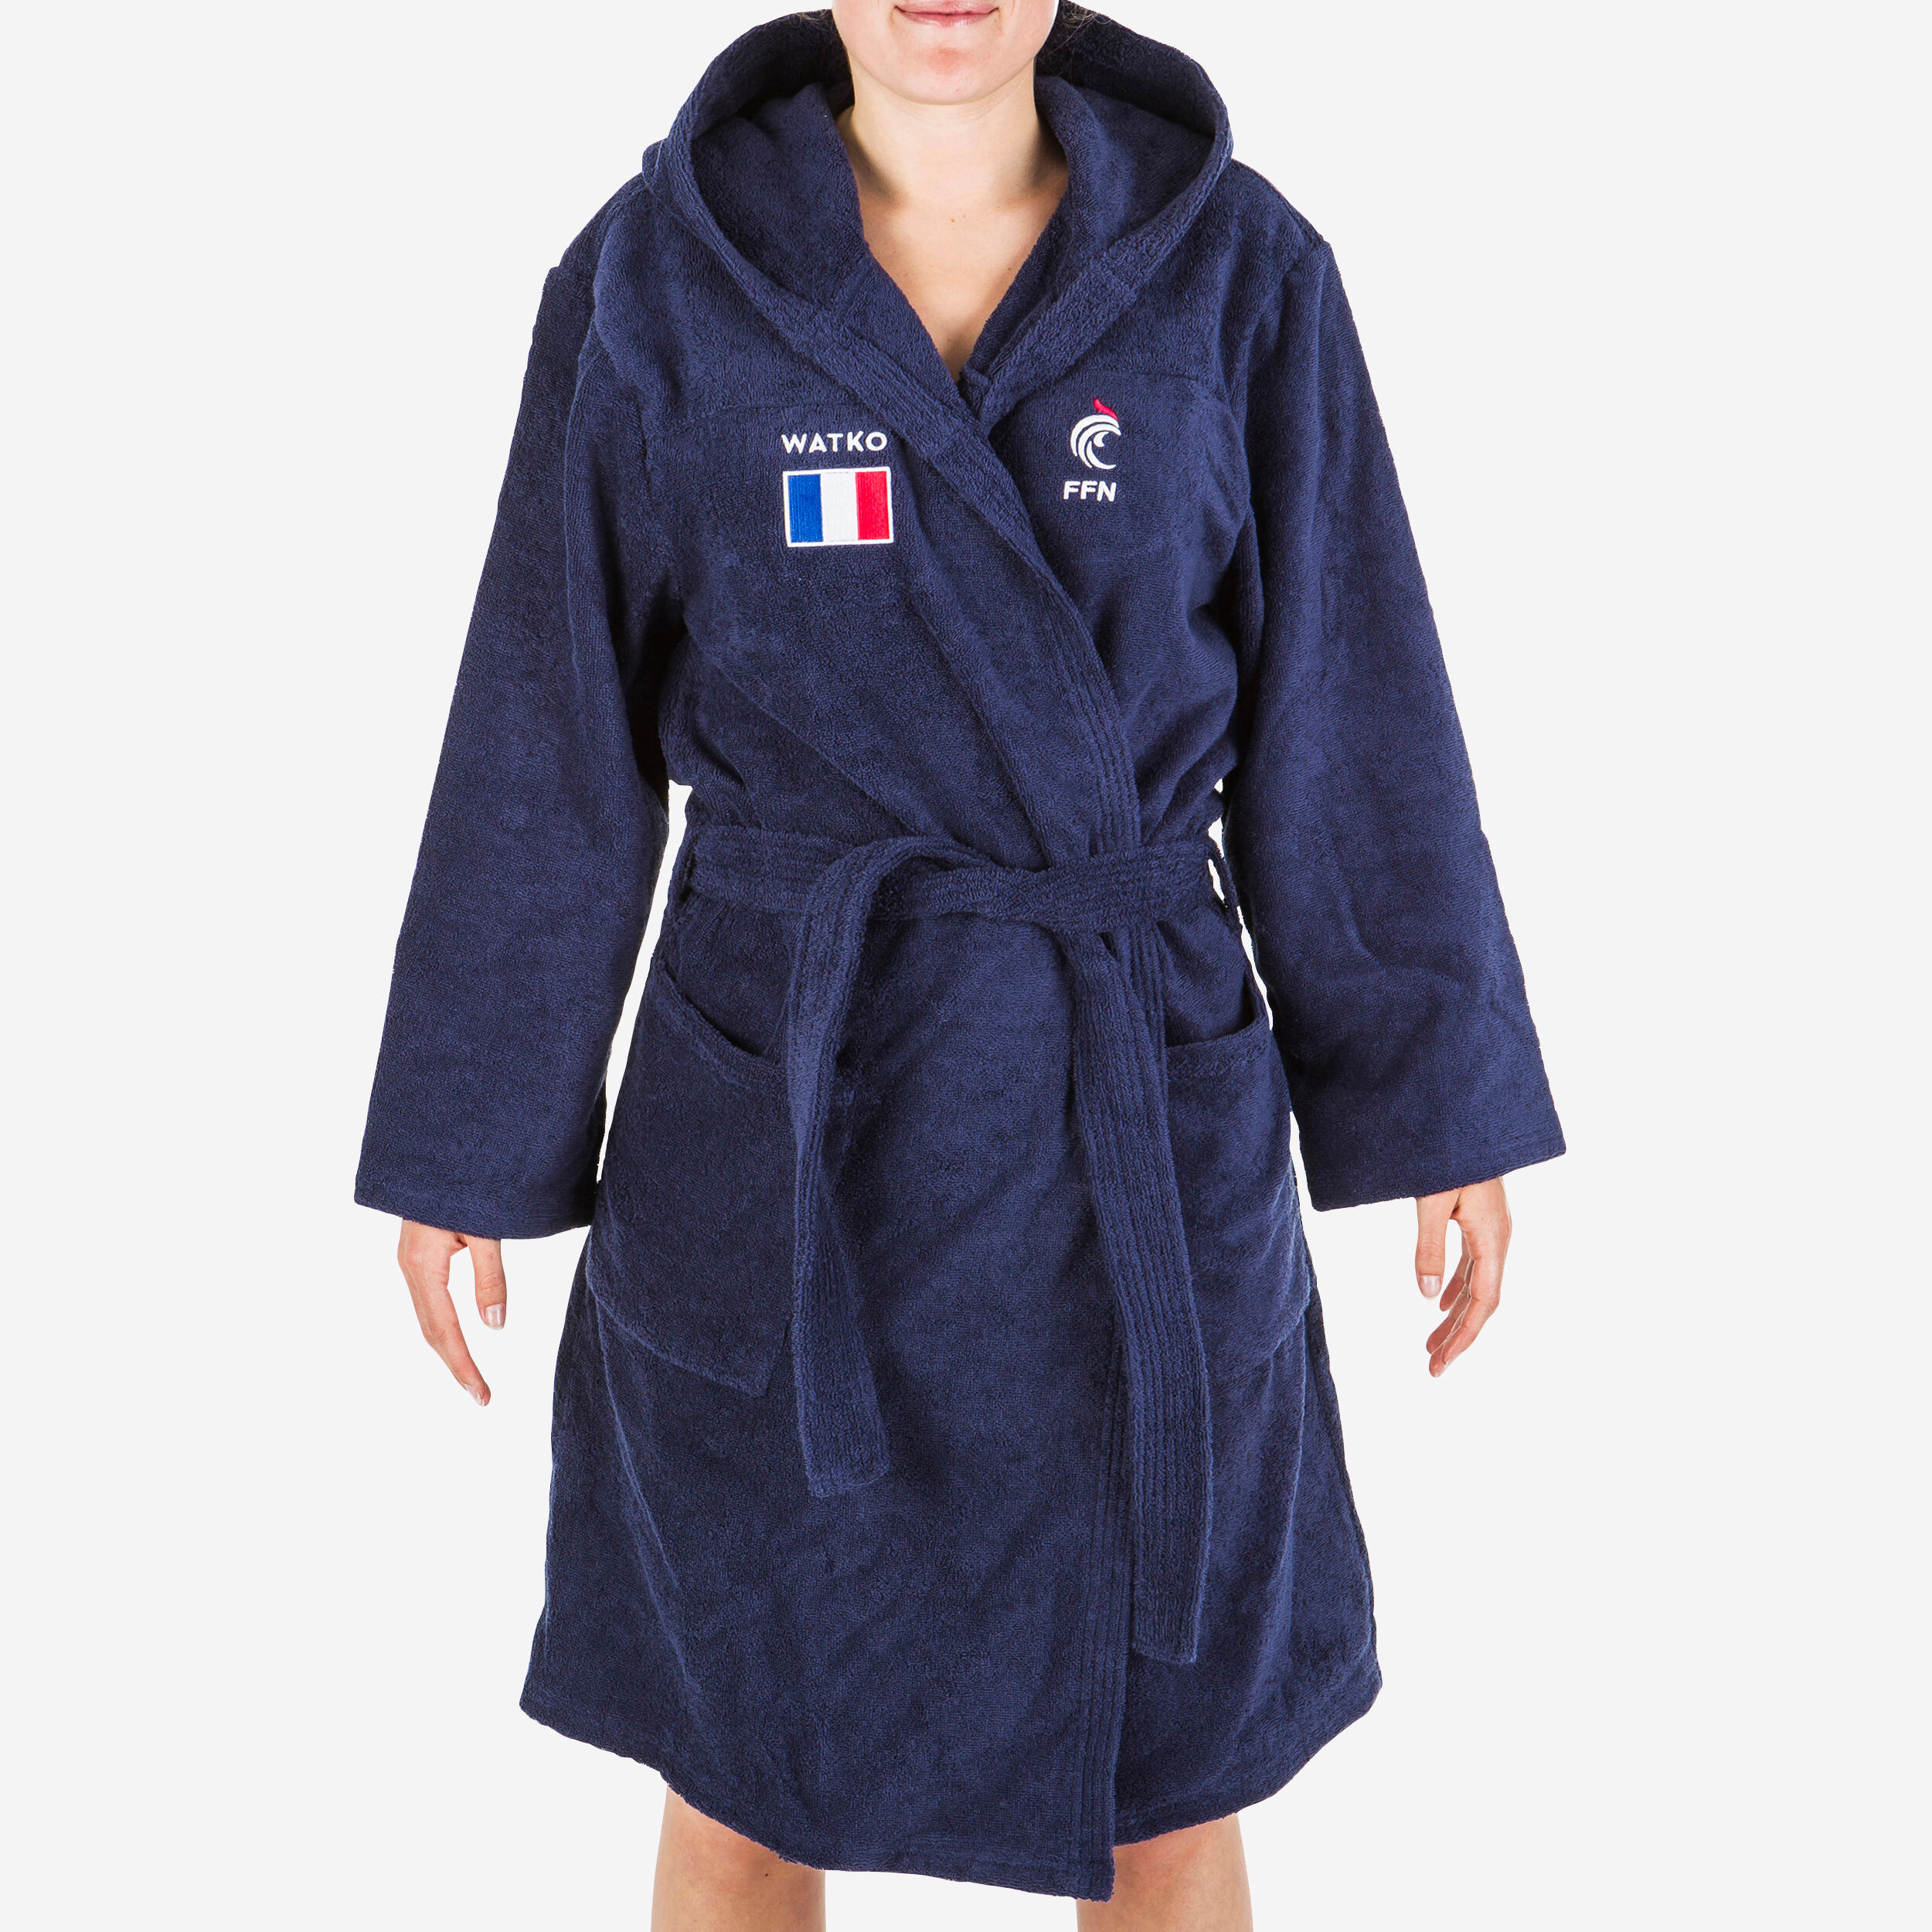 WOMEN'S WATER POLO THICK COTTON POOL BATHROBE - OFFICIAL FRANCE 2/7